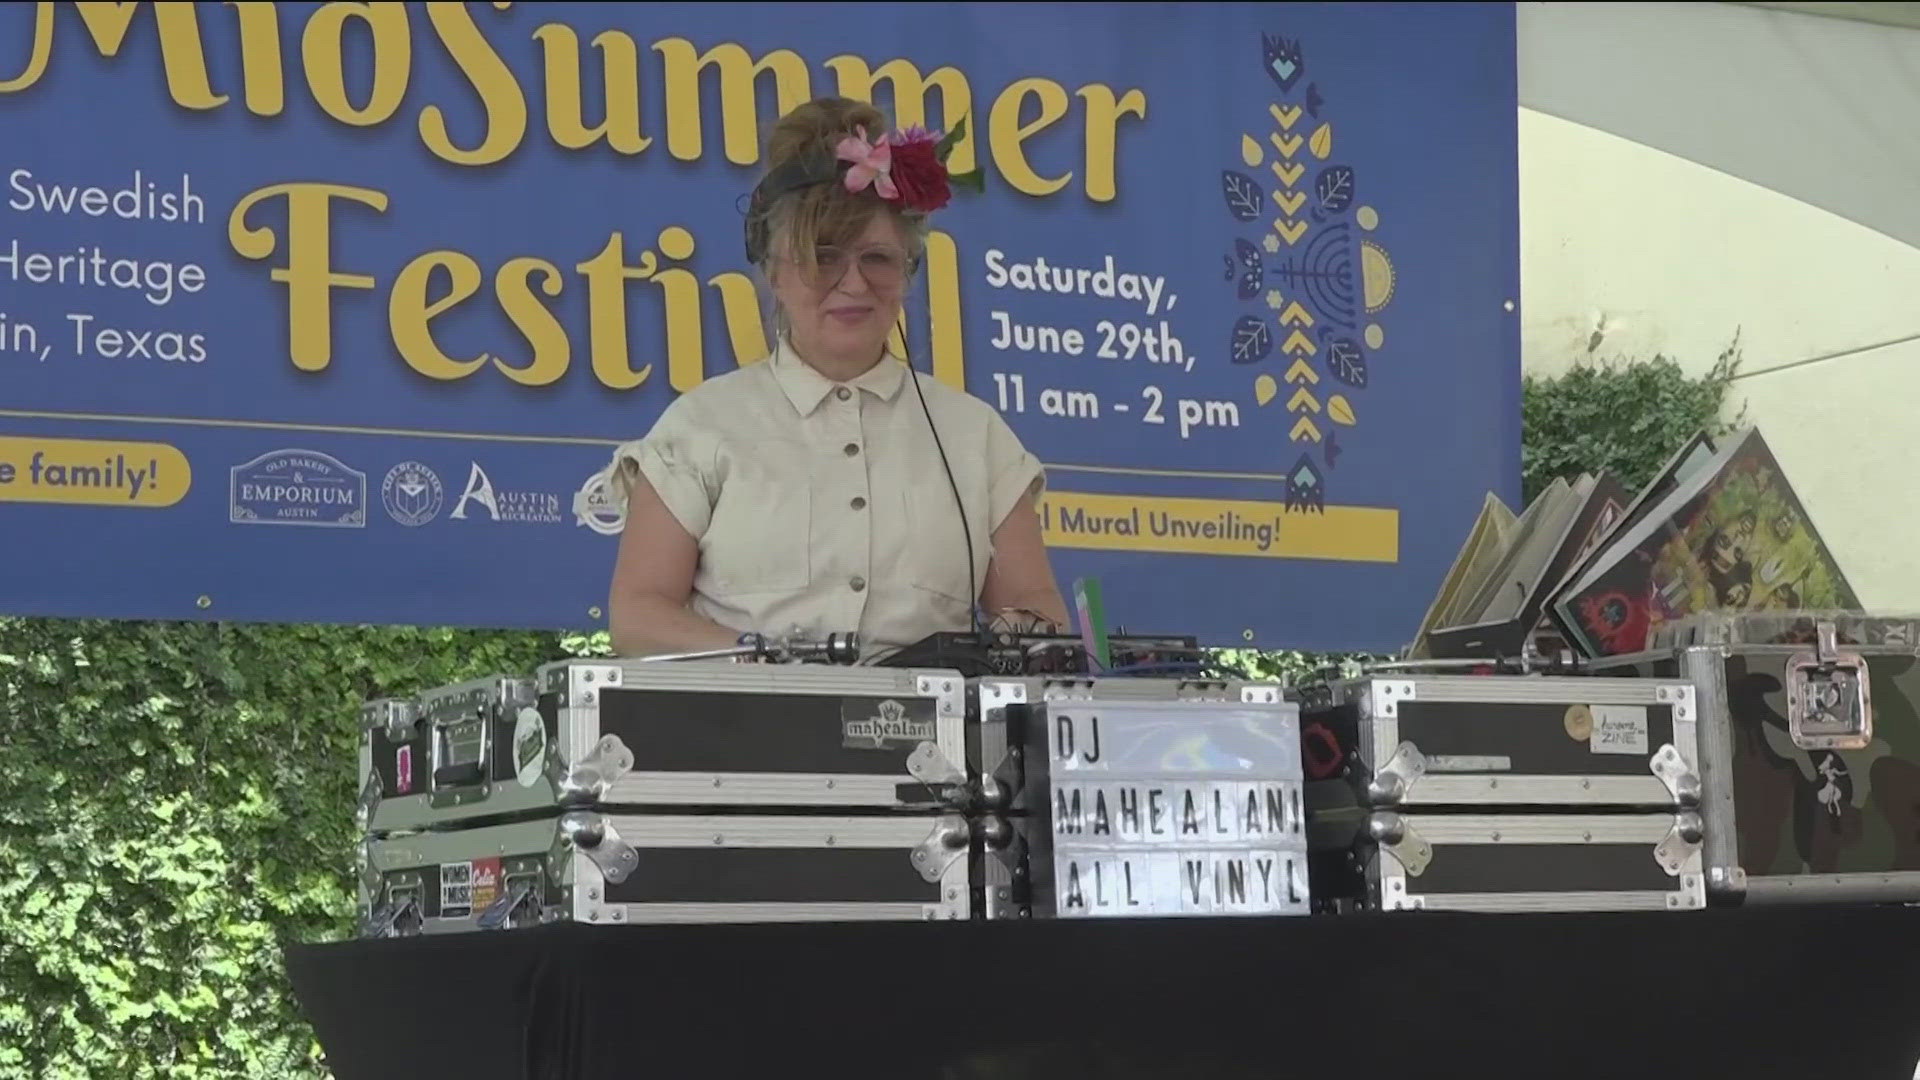 For the third year in a row, families in Austin are celebrating the Swedish American heritage in Austin at the Midsummer festival. KVUE spoke with festivalgoers.